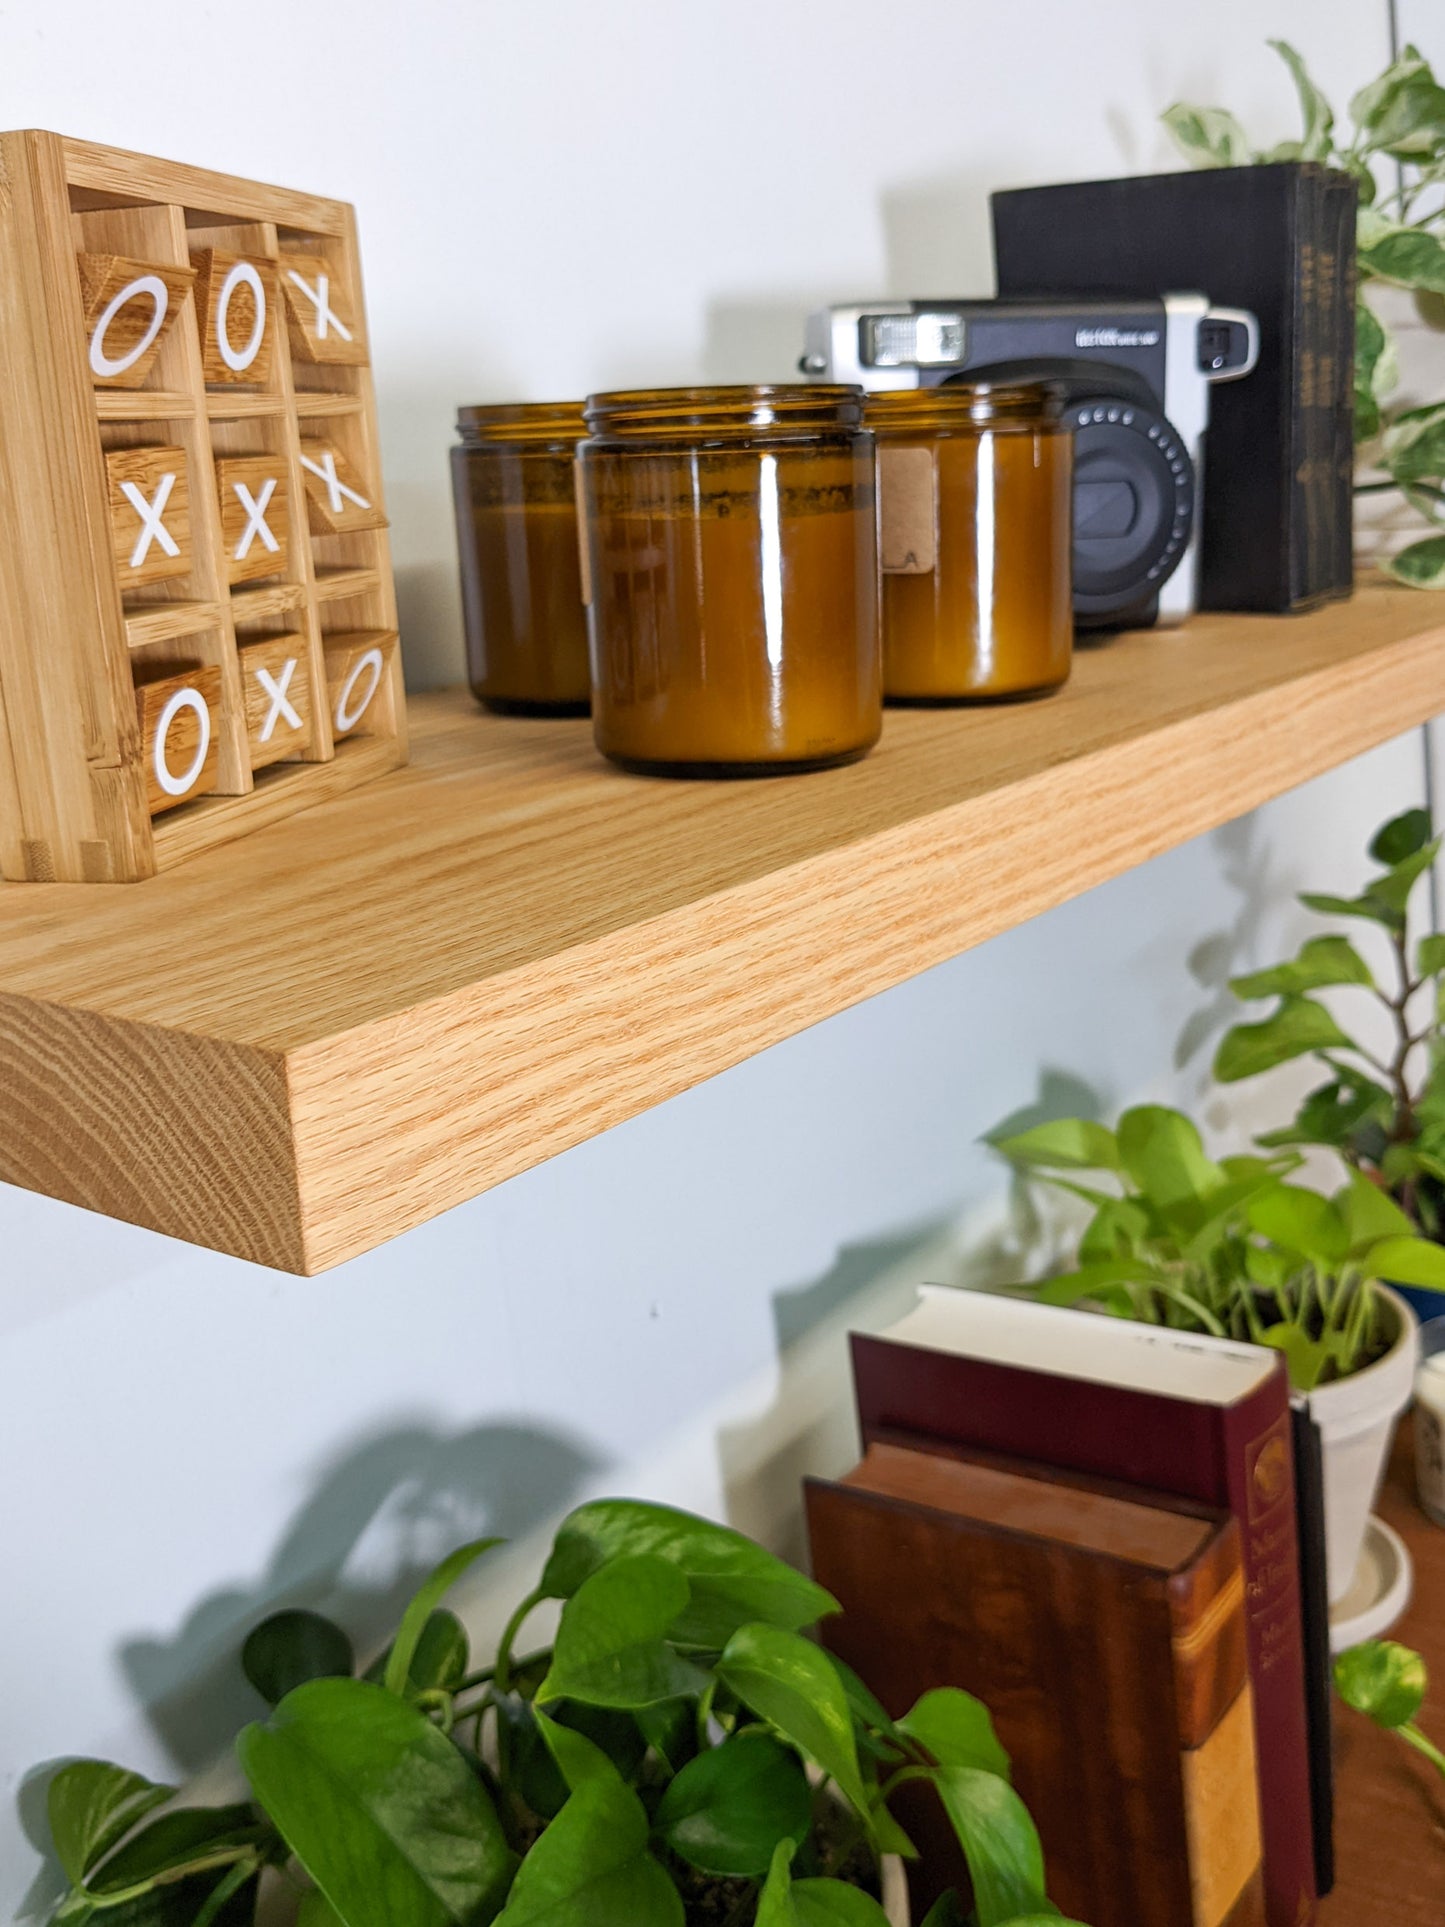 The side view of a long oak floating shelf that displays three amber candles, a decorative wooden tic-tac-toe game, three vintage books, and a vintage camera.